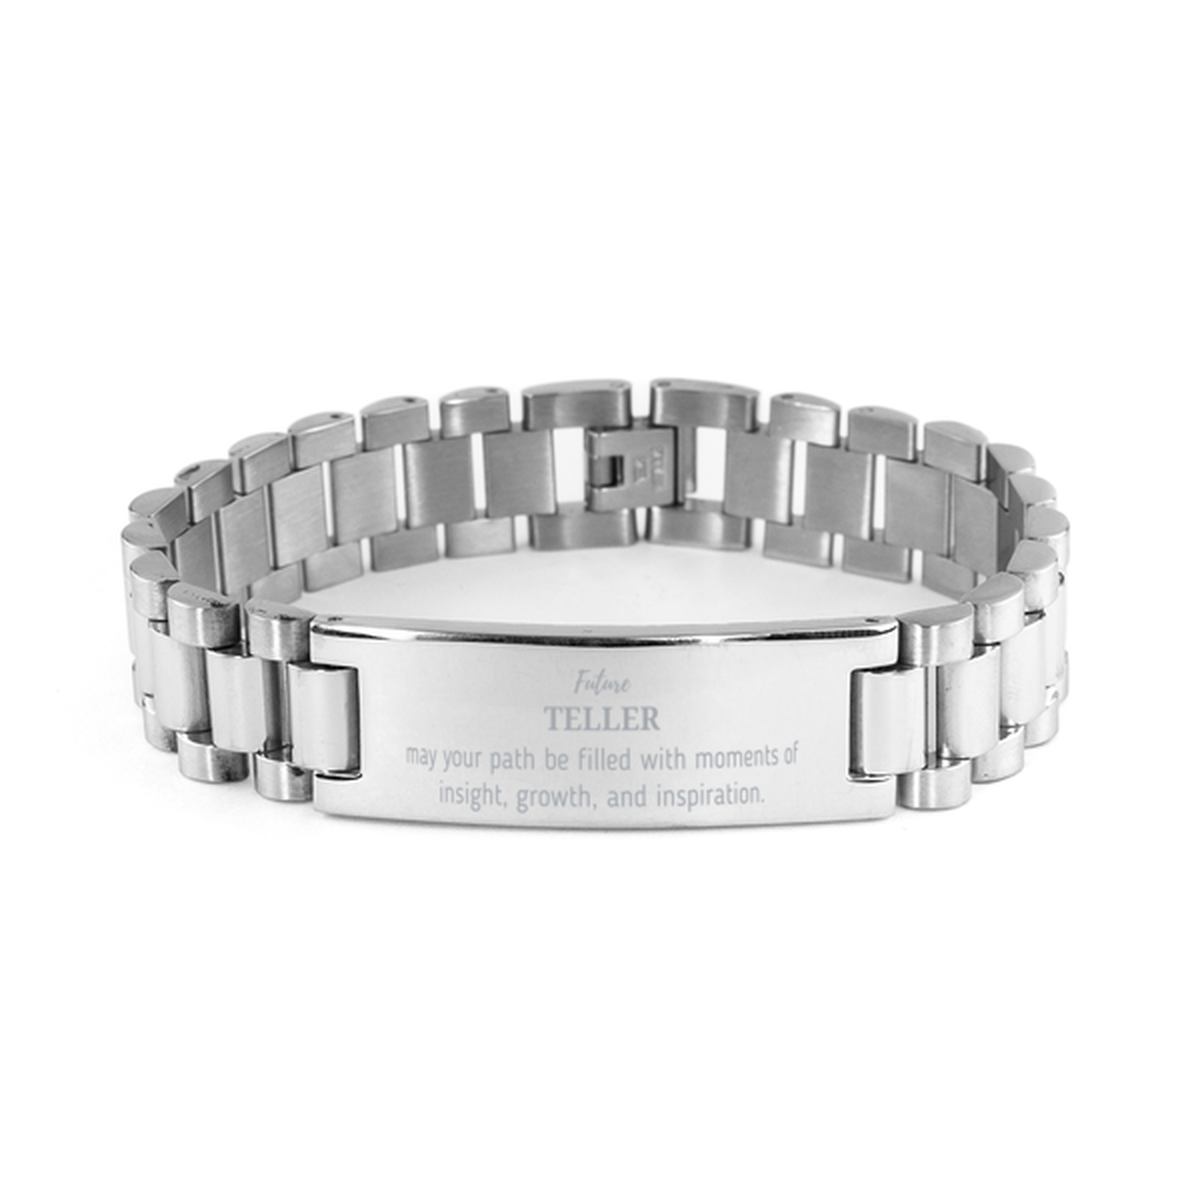 Future Teller Gifts, May your path be filled with moments of insight, Graduation Gifts for New Teller, Christmas Unique Ladder Stainless Steel Bracelet For Men, Women, Friends